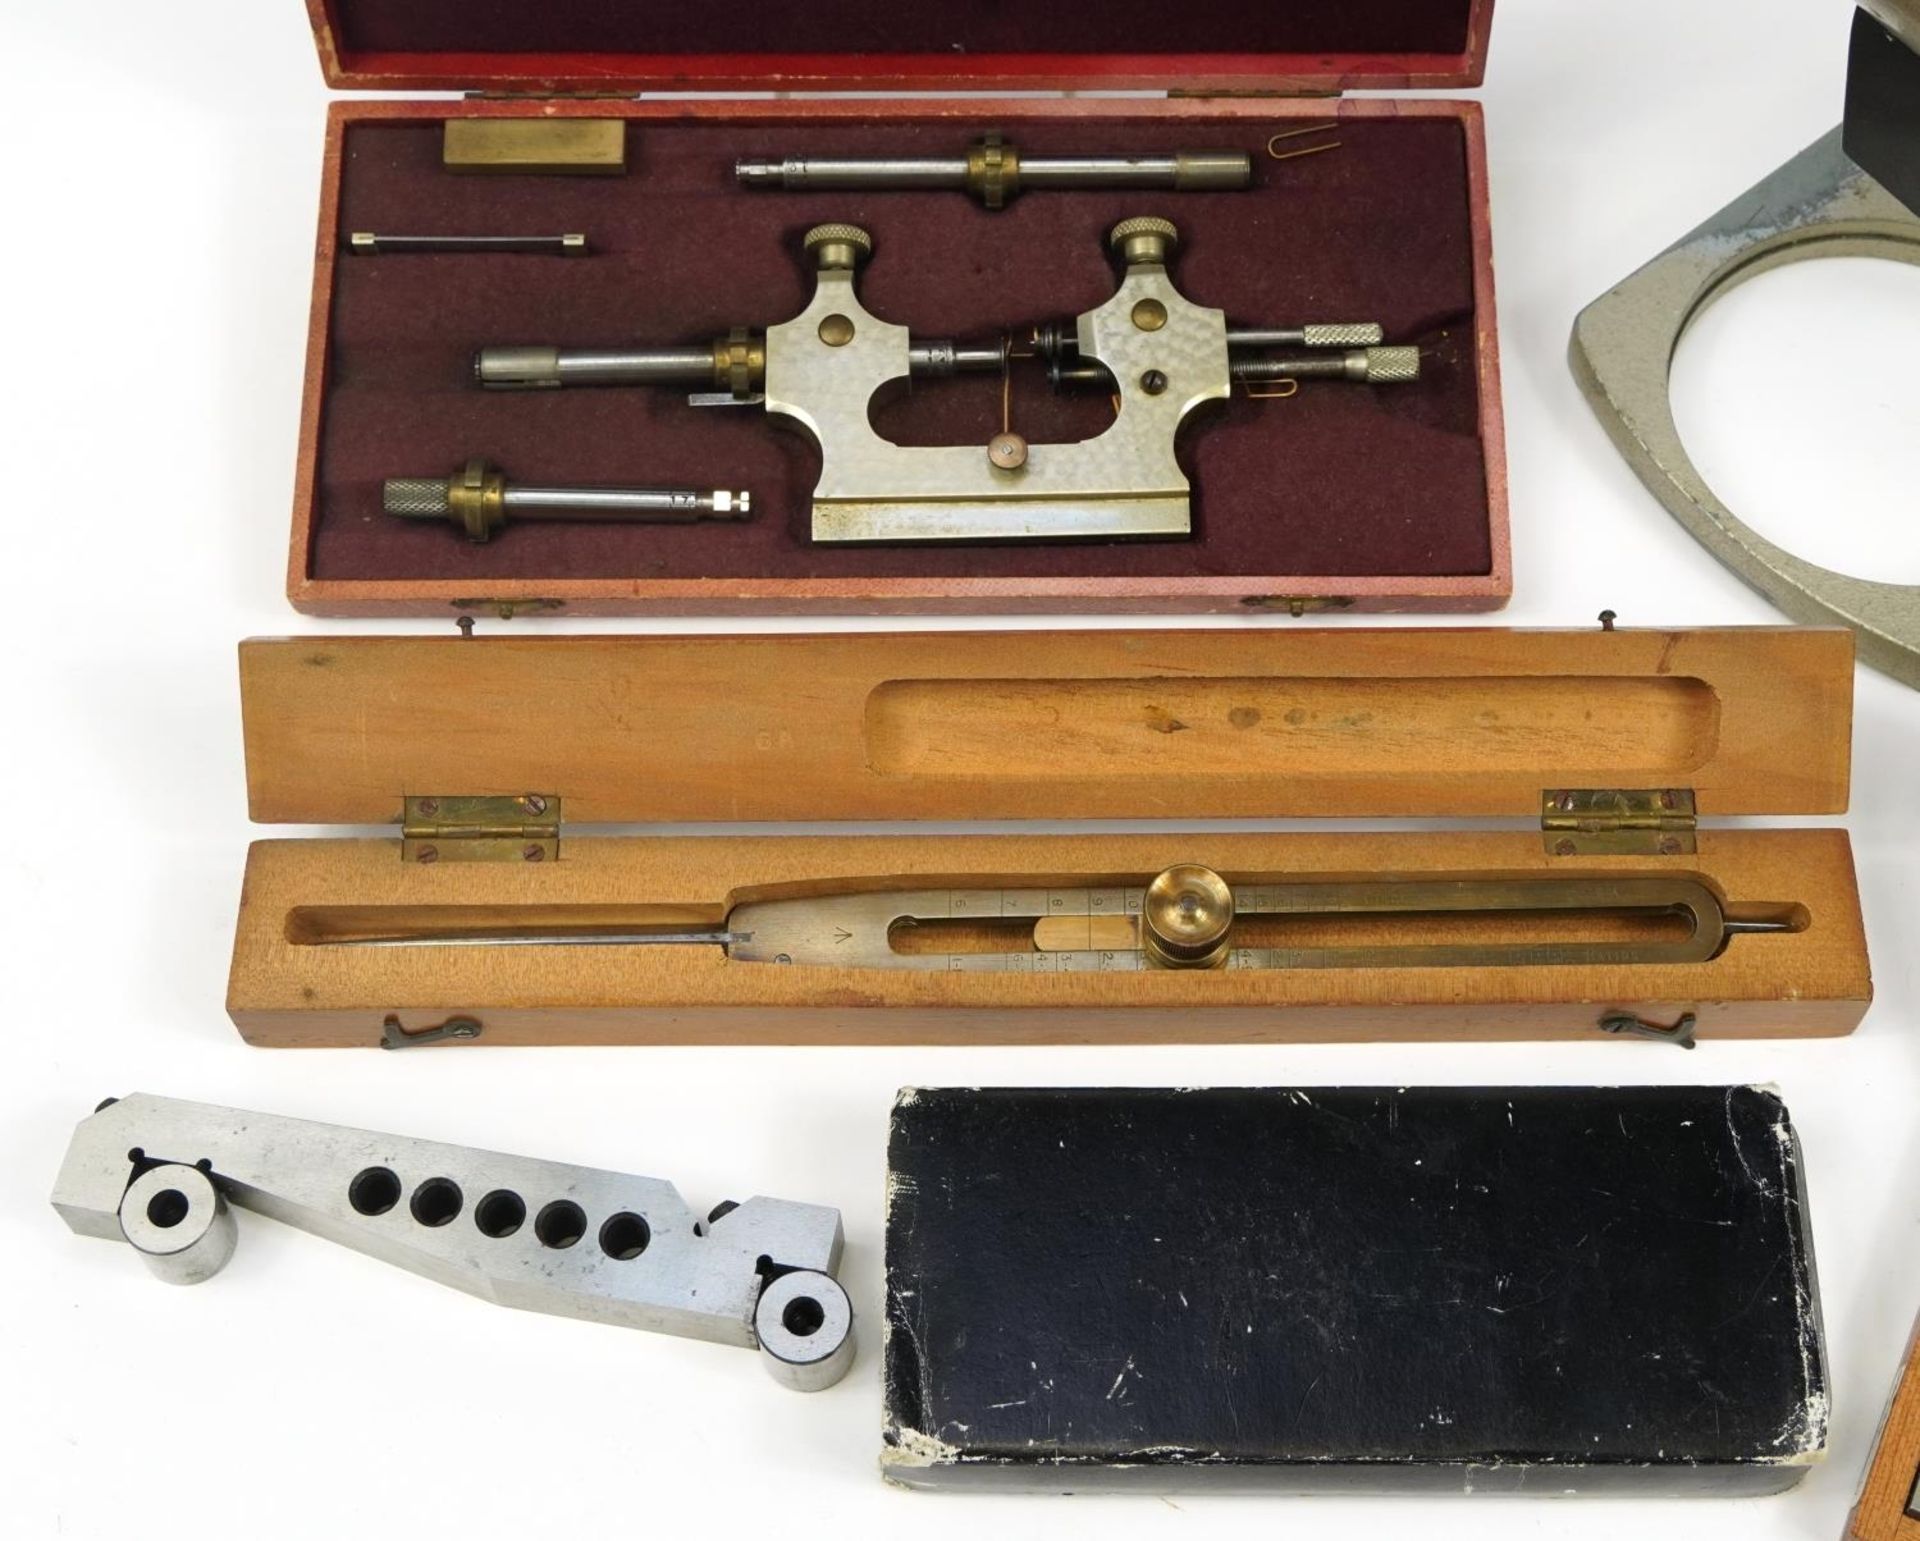 Vintage optical and precision instruments including a Tour a Pivoter watchmaker's lathe with case, - Image 2 of 4